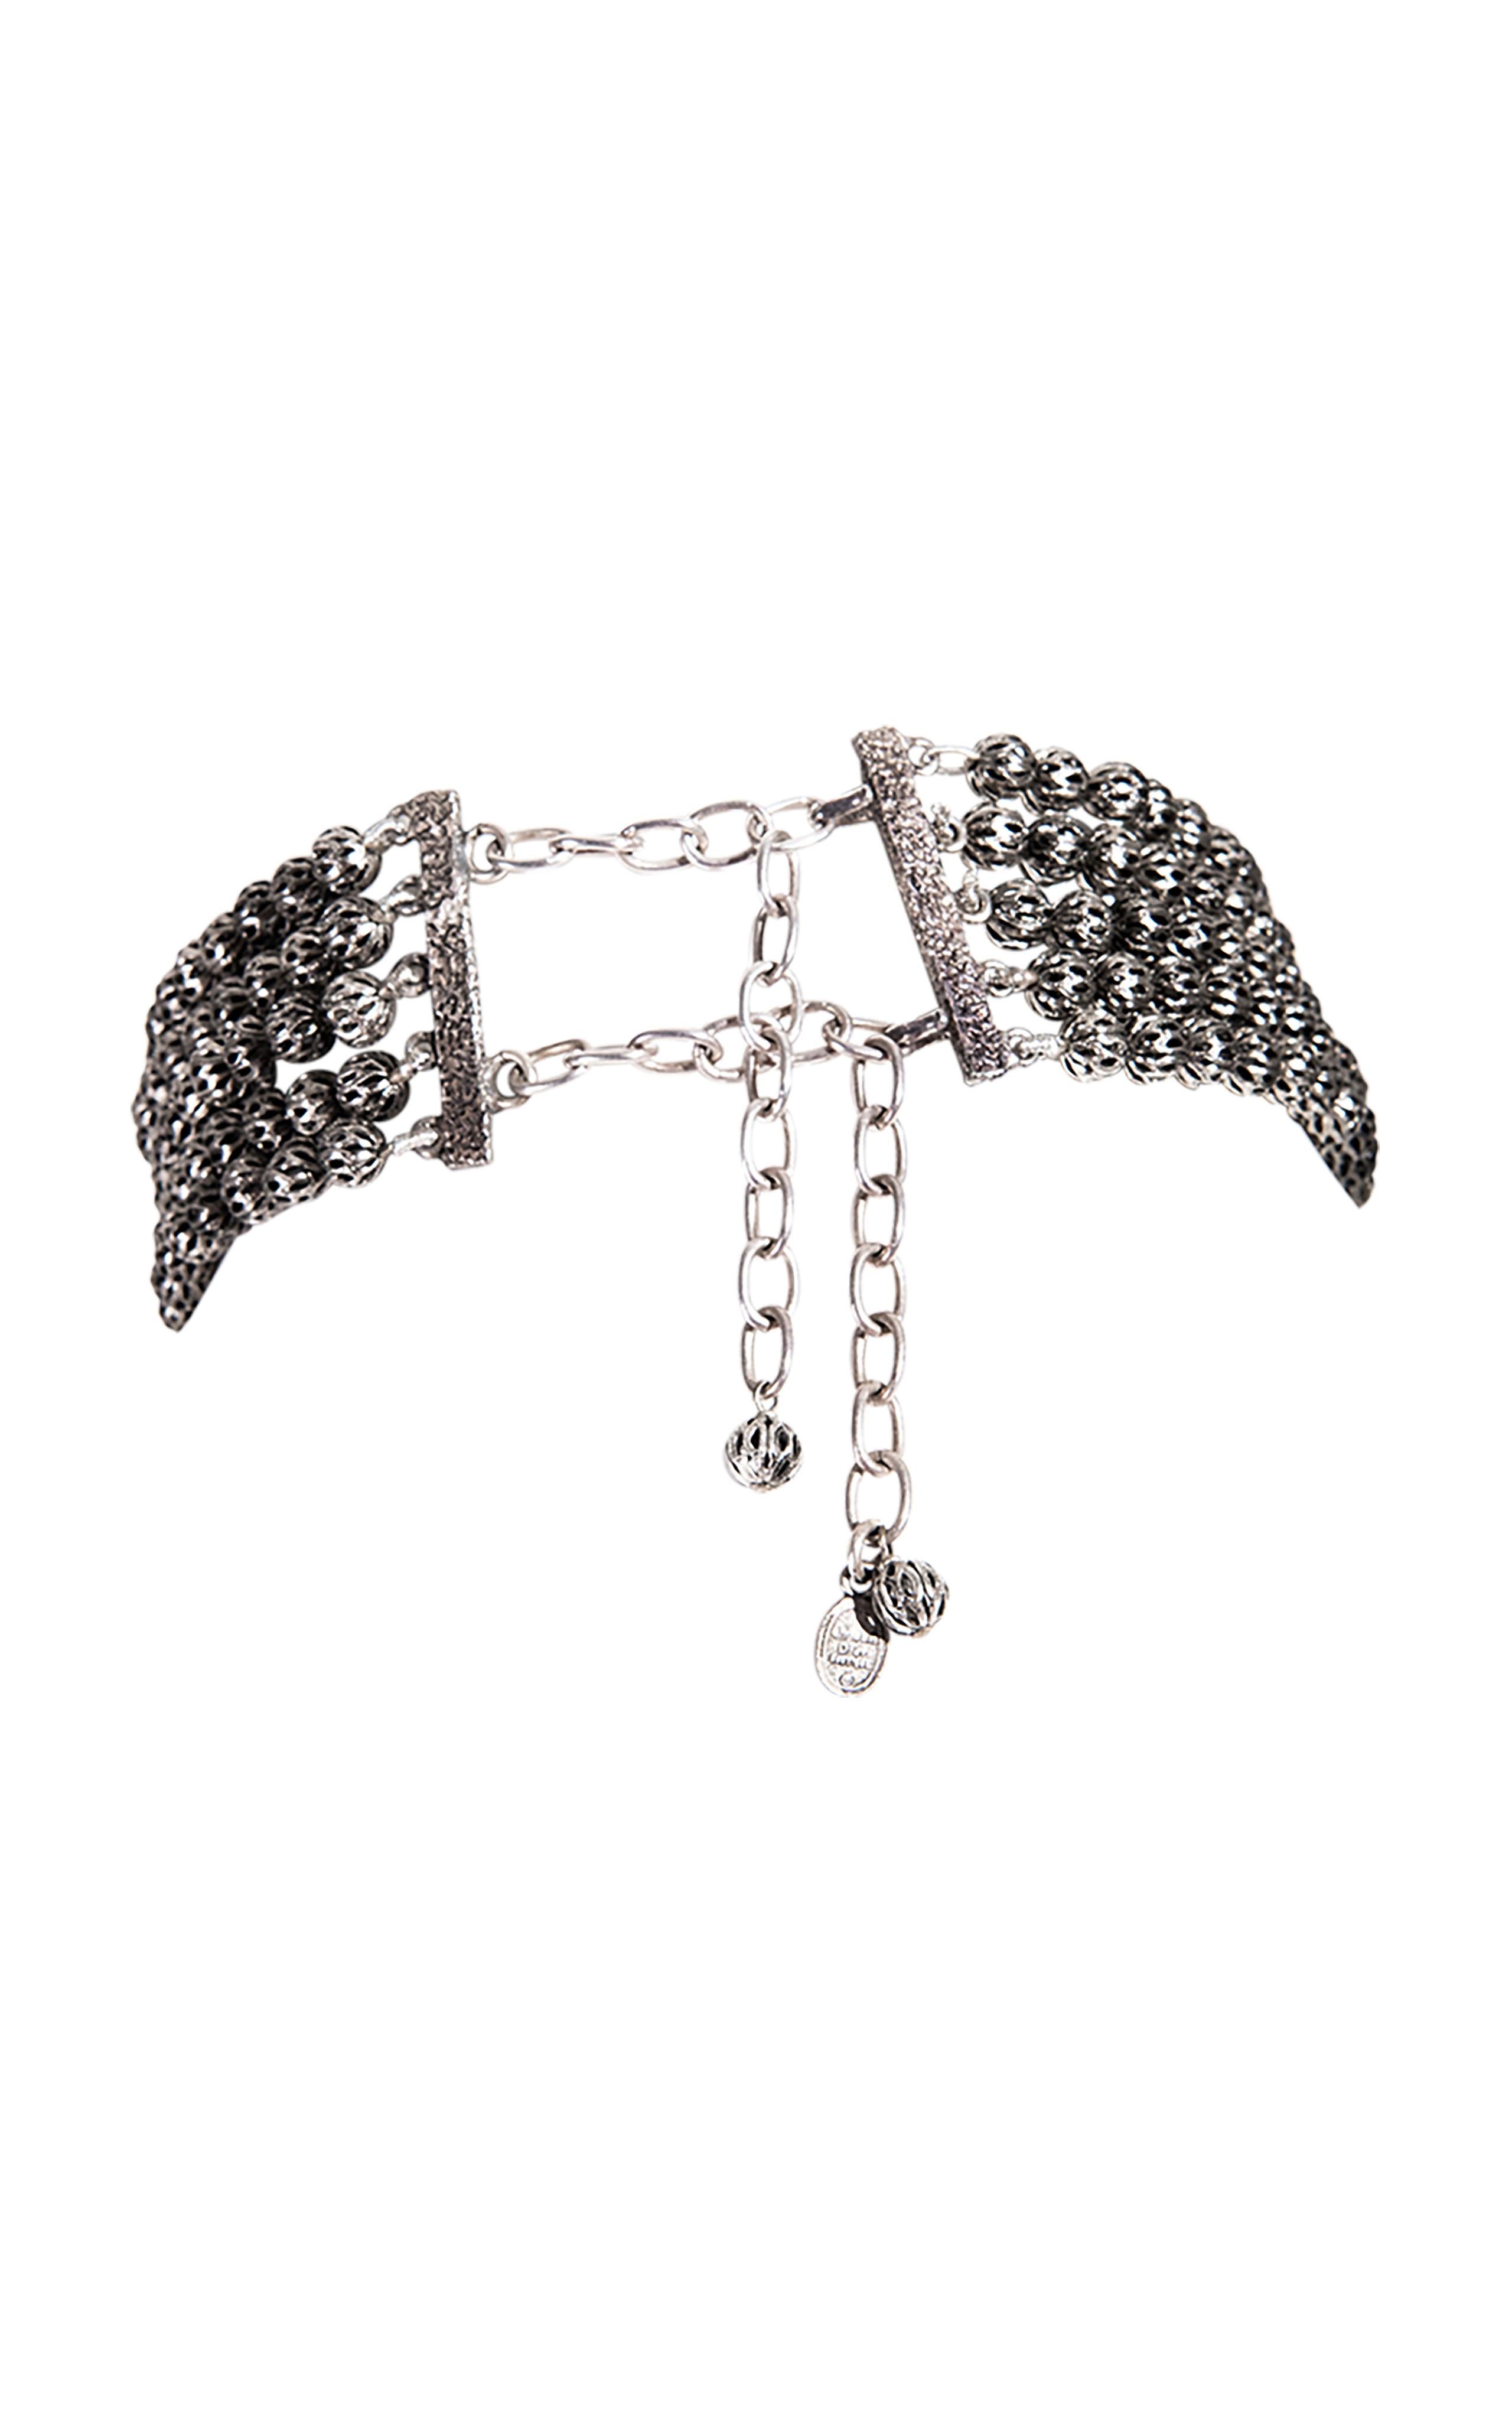 S/S 1998 Christian Dior by Galliano silver cameo choker necklace. 5 strands of large silver beading connect to two extra large ornate floral cameos - a style of necklace widely popularized in the early 20th century. Similar versions seen in the S/S